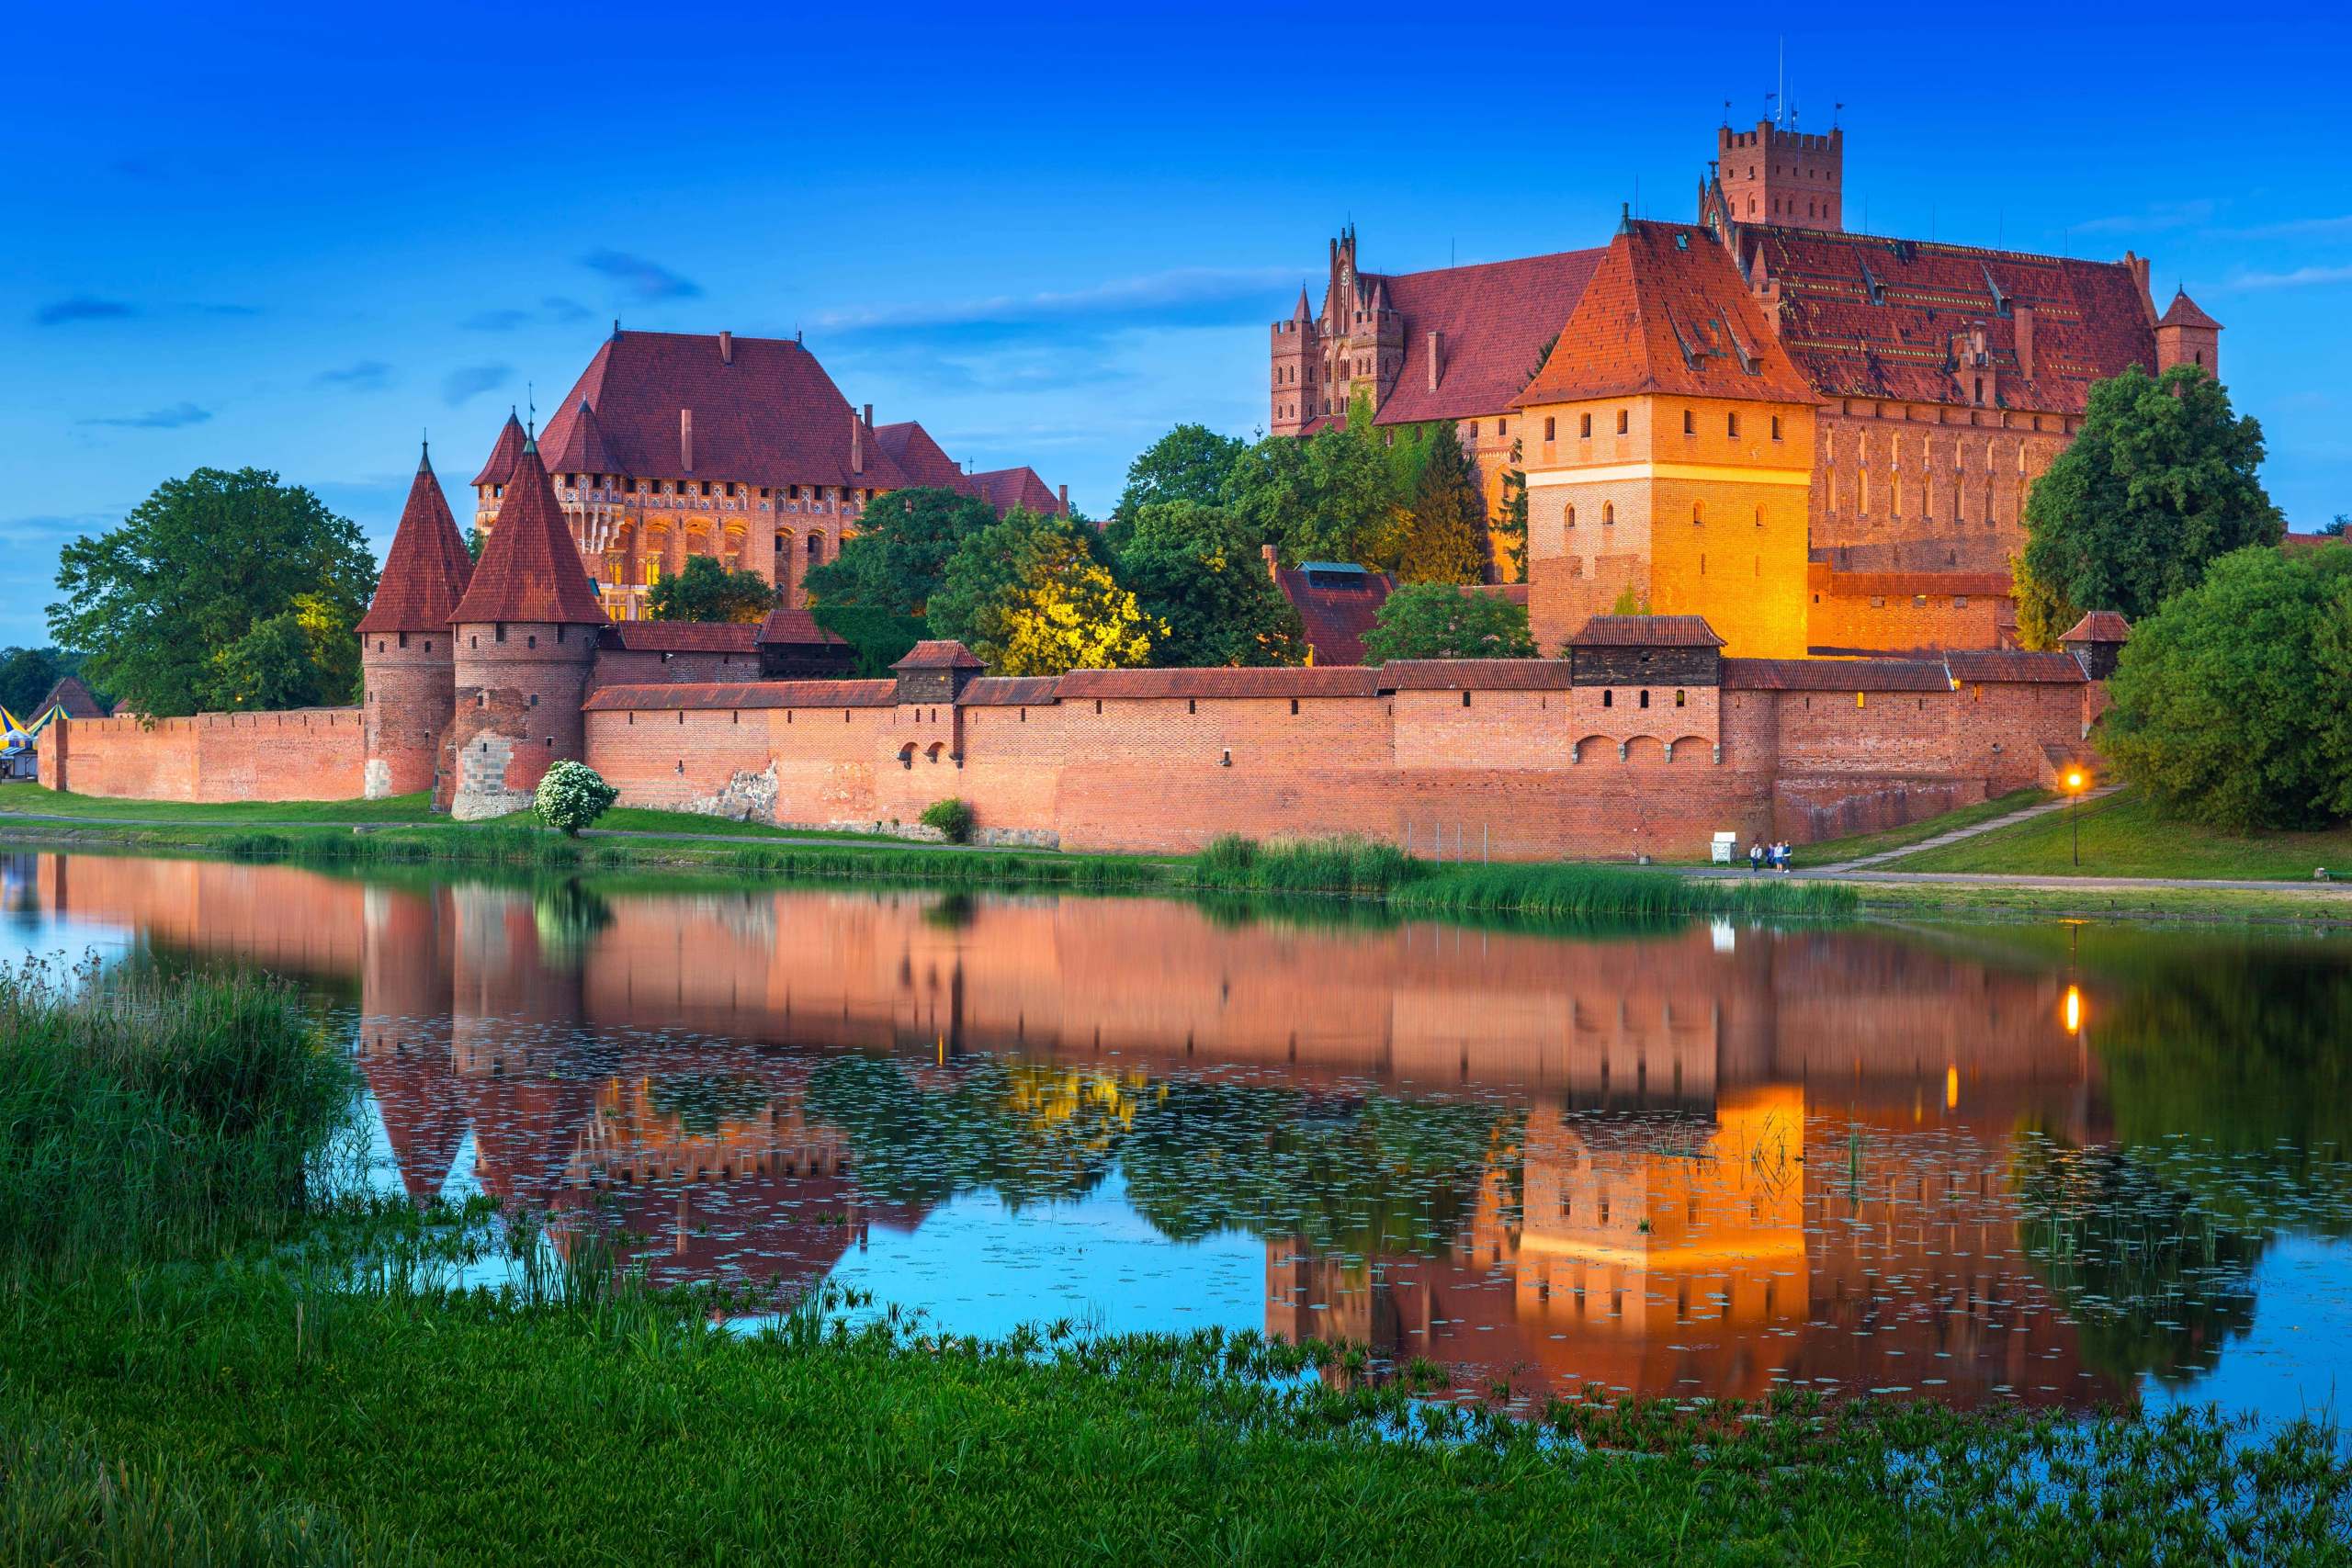 Malbork castle at dusk from the other side of the river.